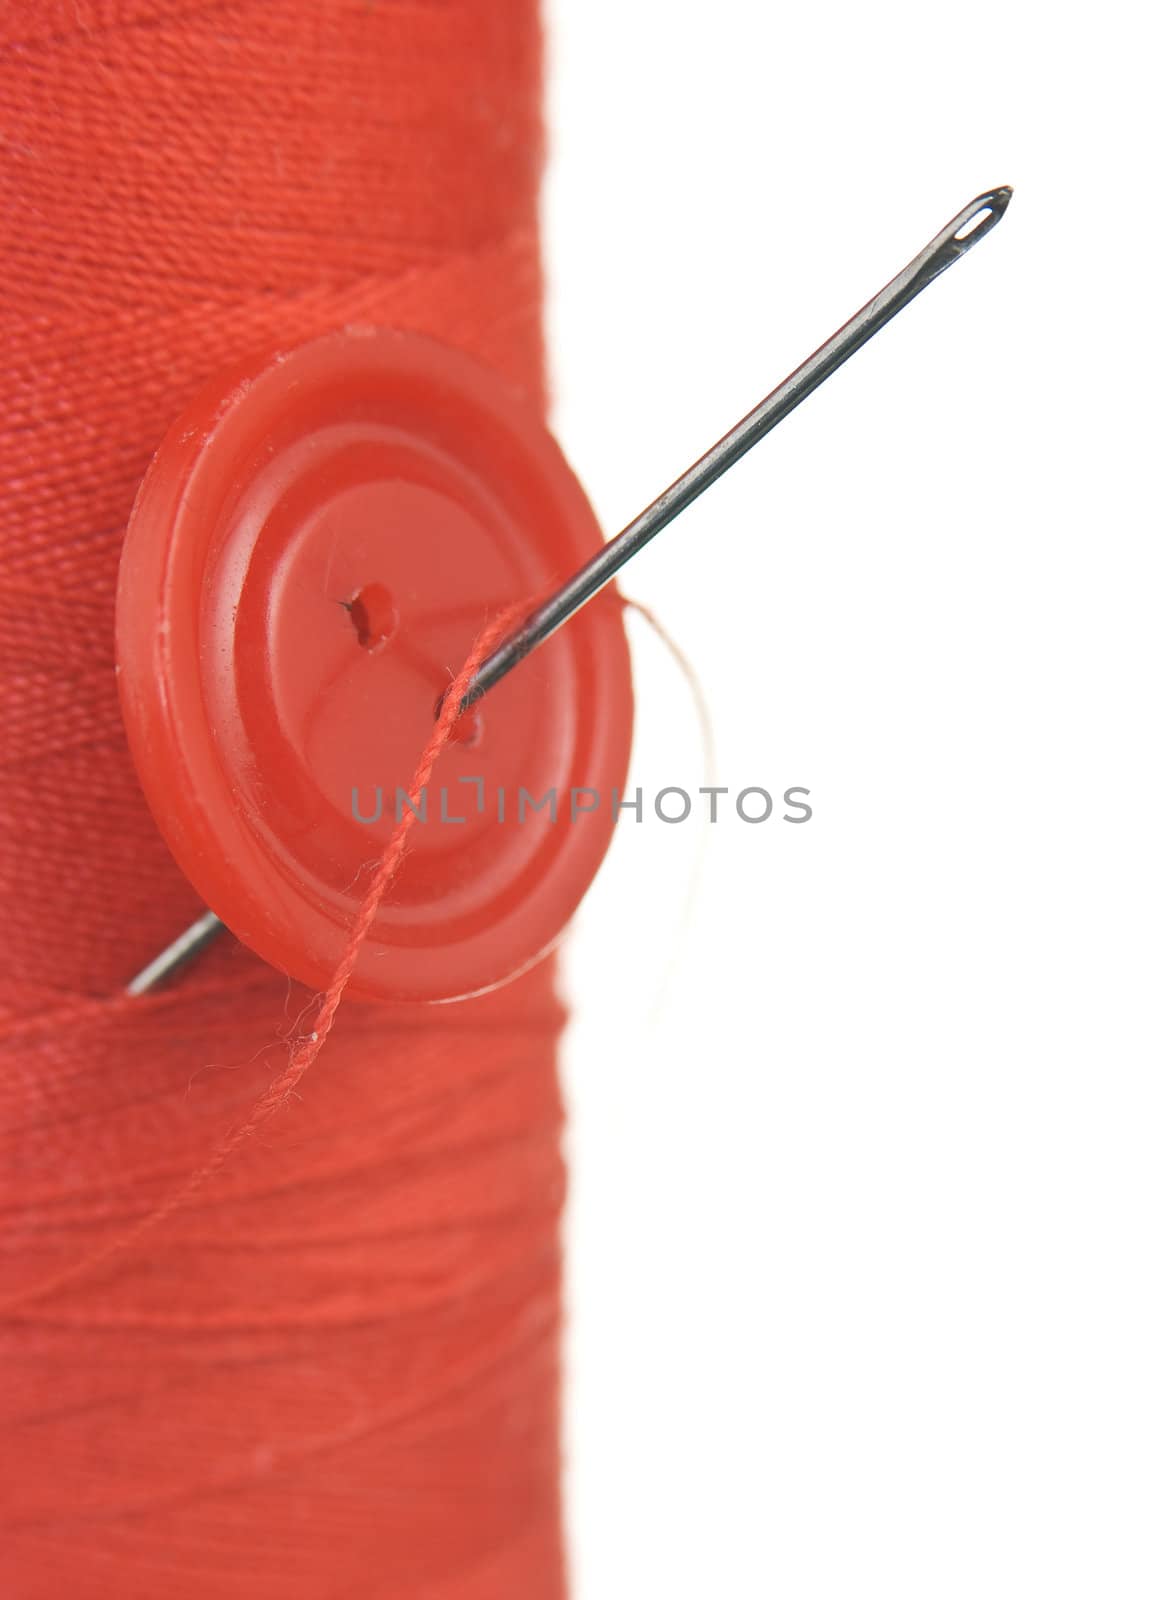 Button pinned the needle to the reel of thread